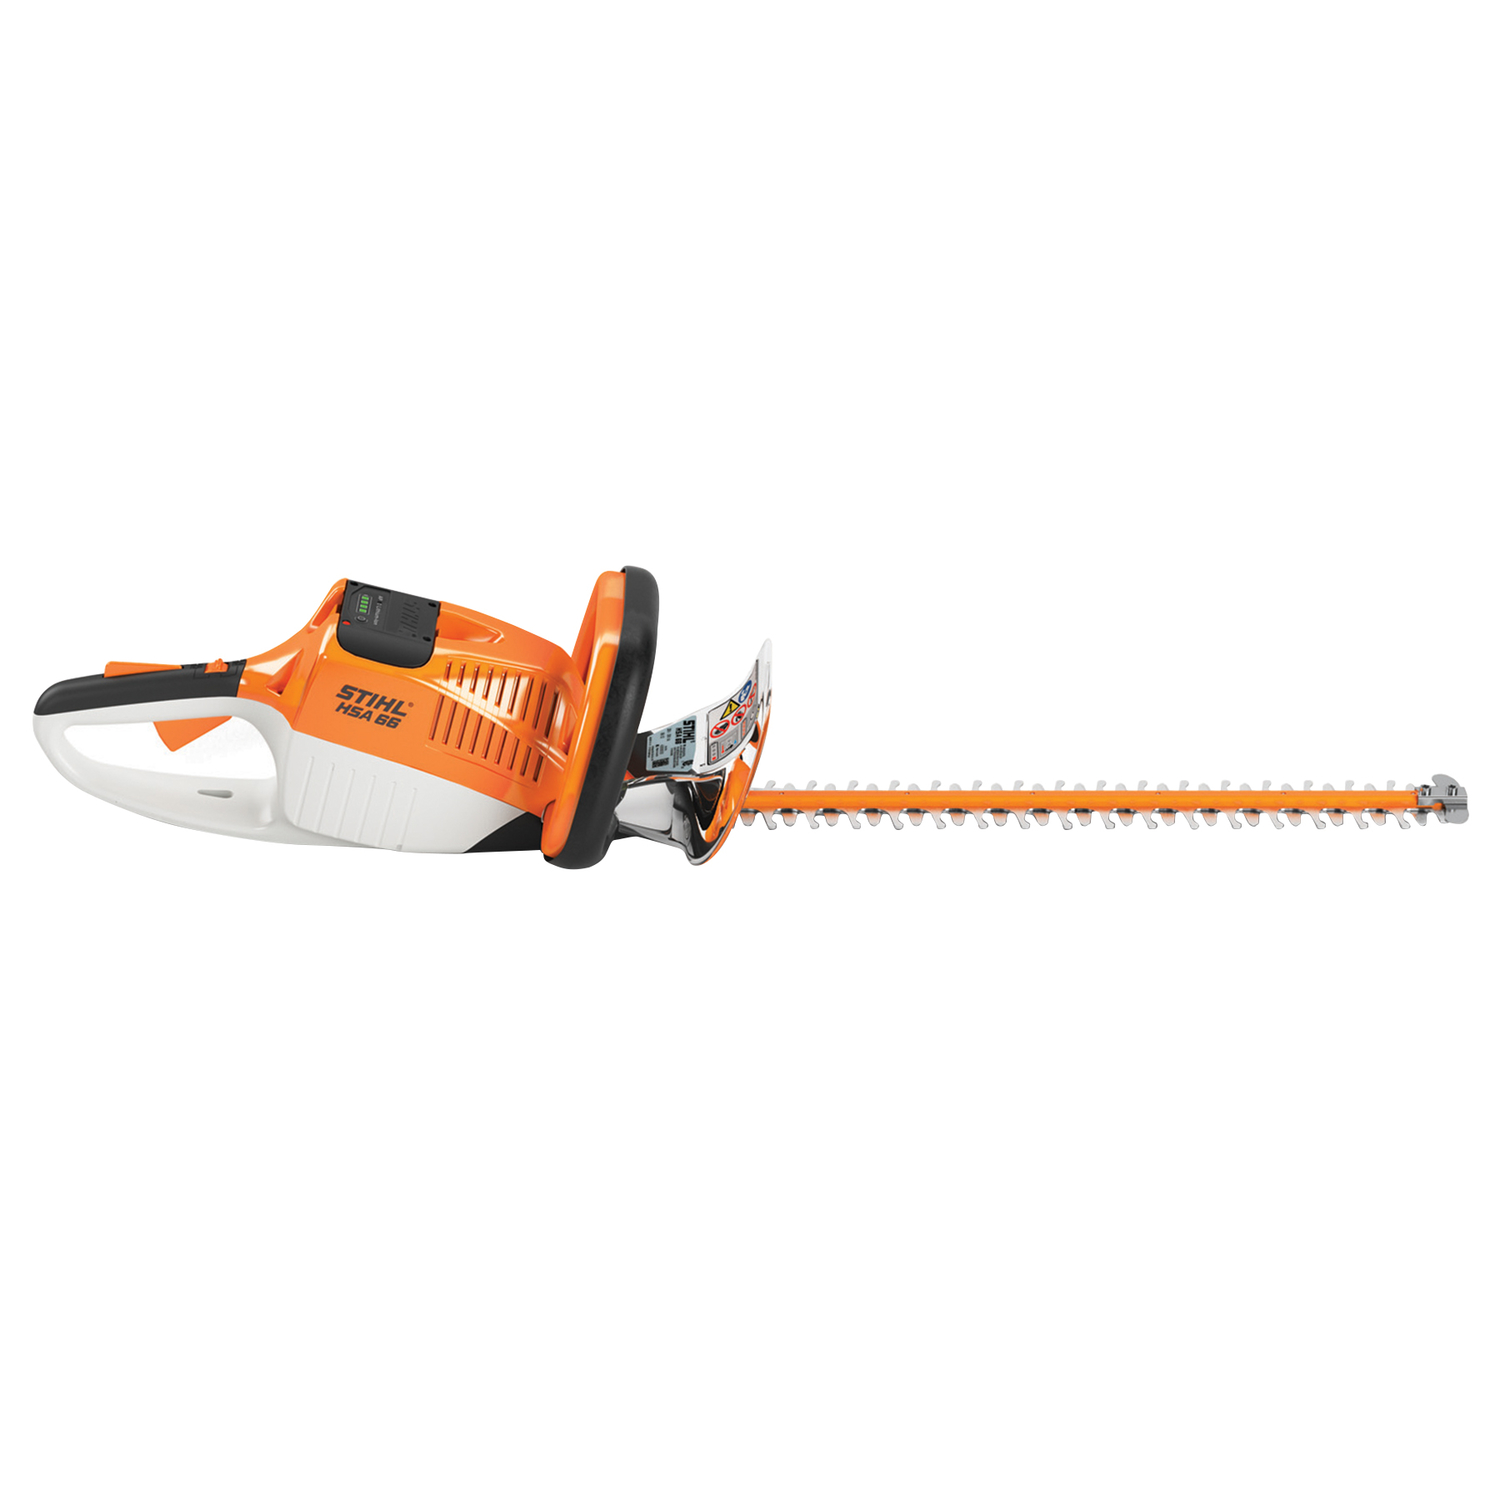 used stihl hedge trimmer for sale